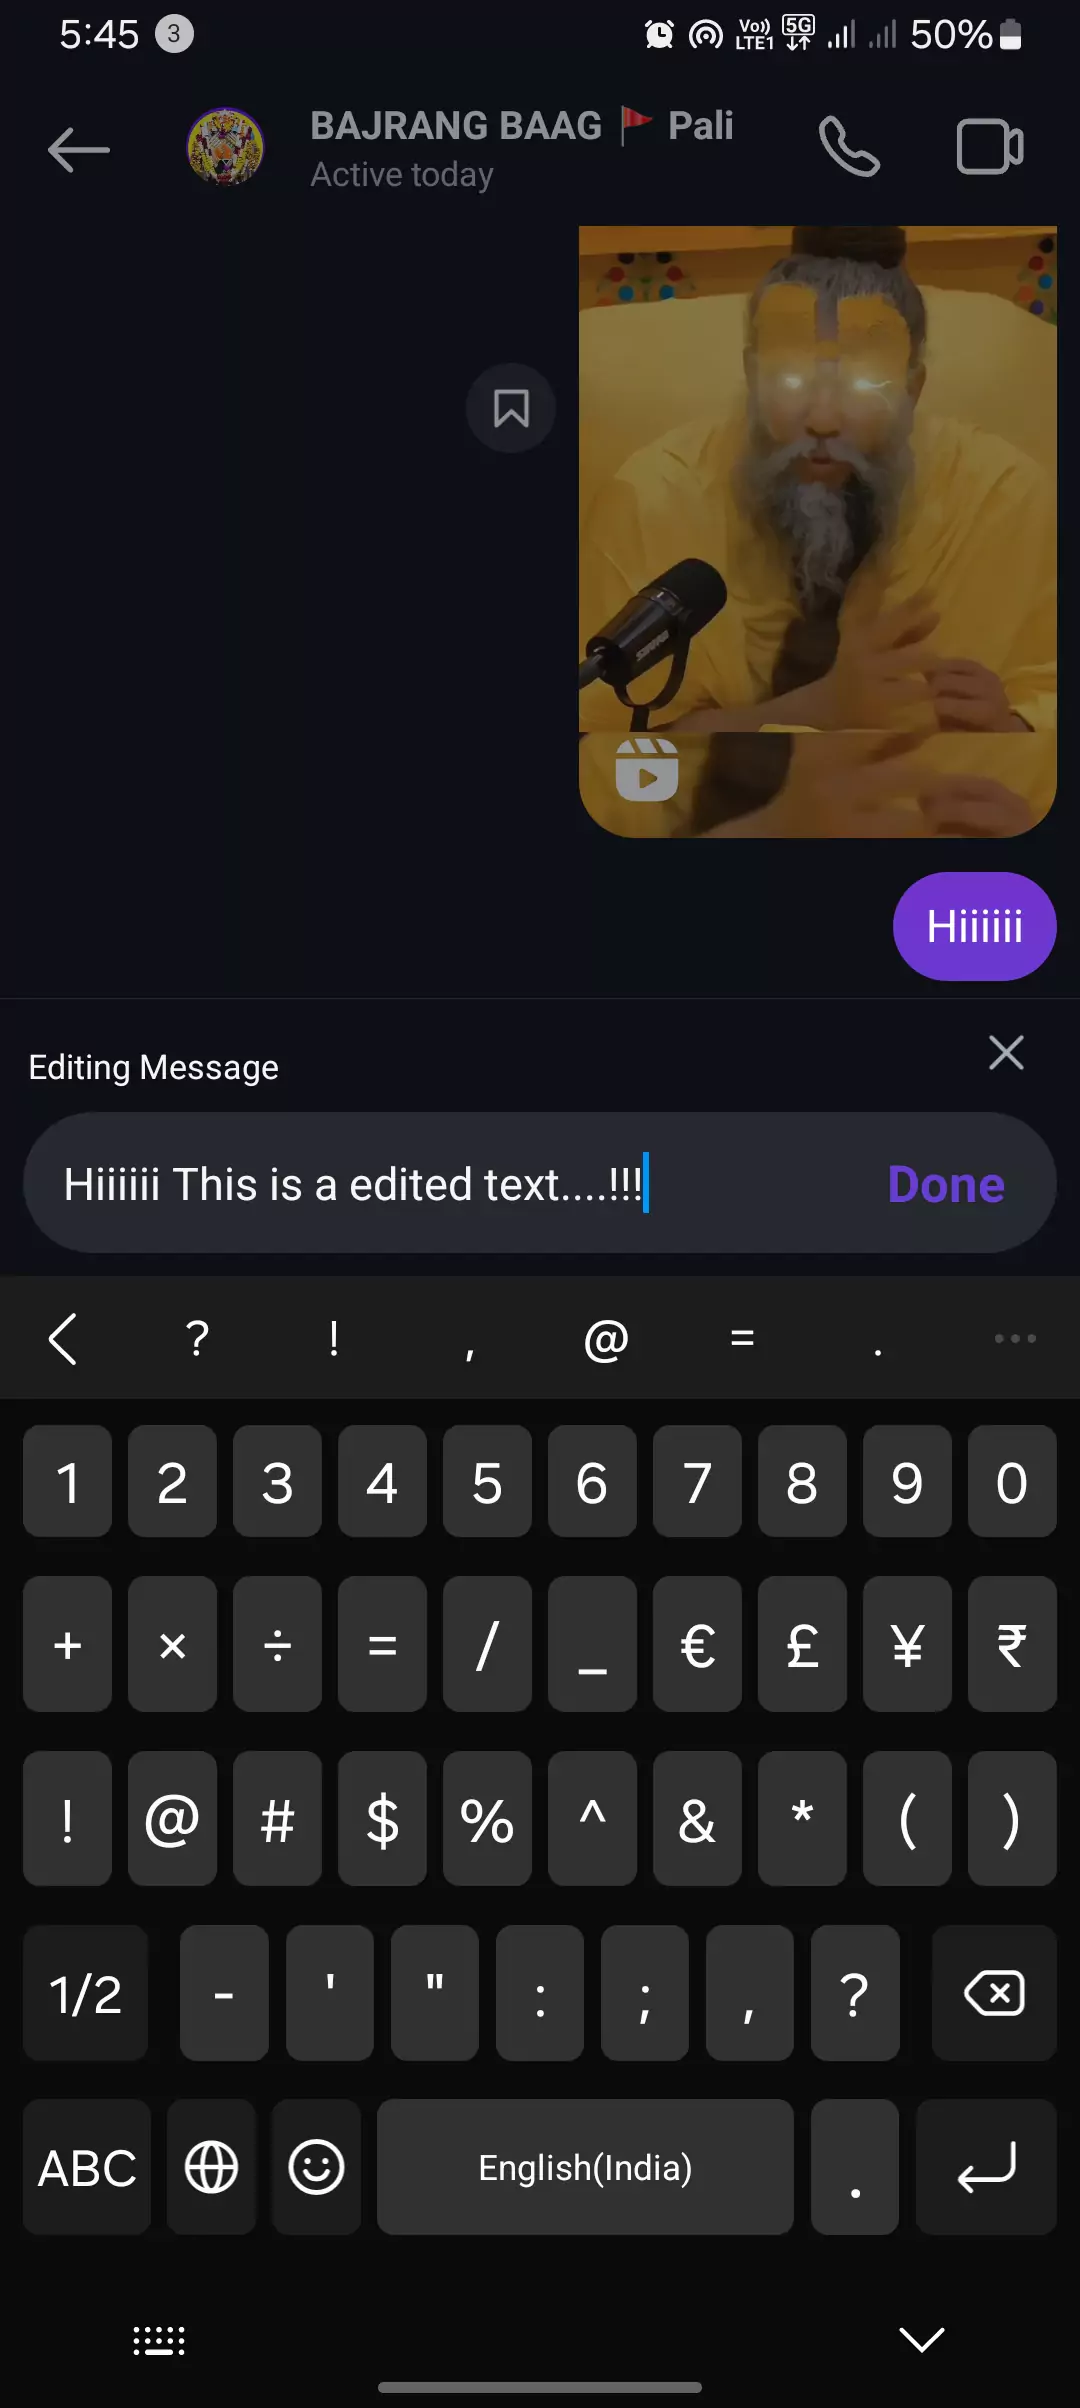 successfully writing a text for edited message